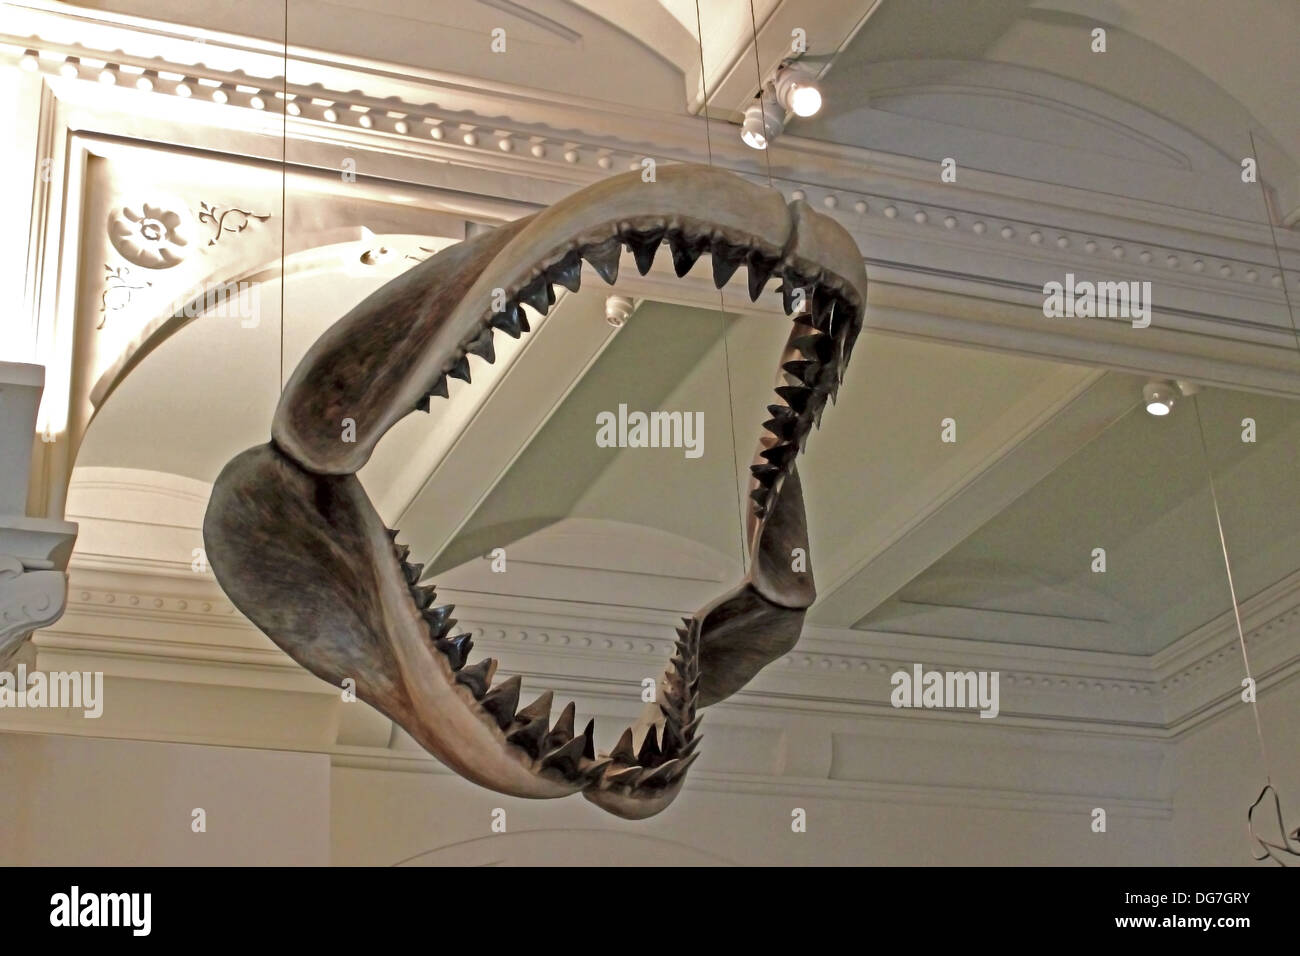 A set of huge Megalodon shark jaws hang from the cieling at the American Museum of Natural History in New York City. Stock Photo